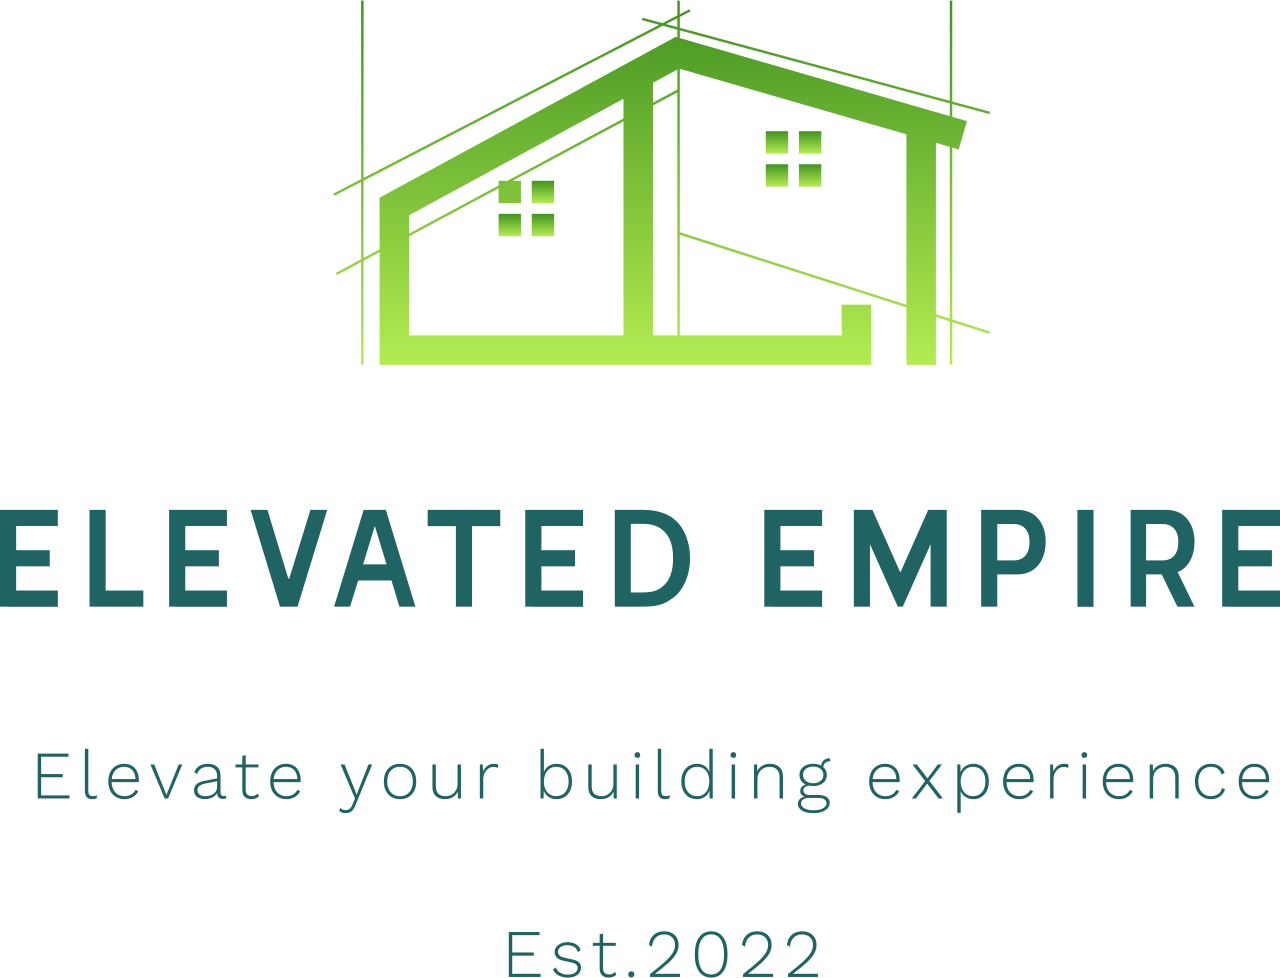 Elevated Empire 's web page